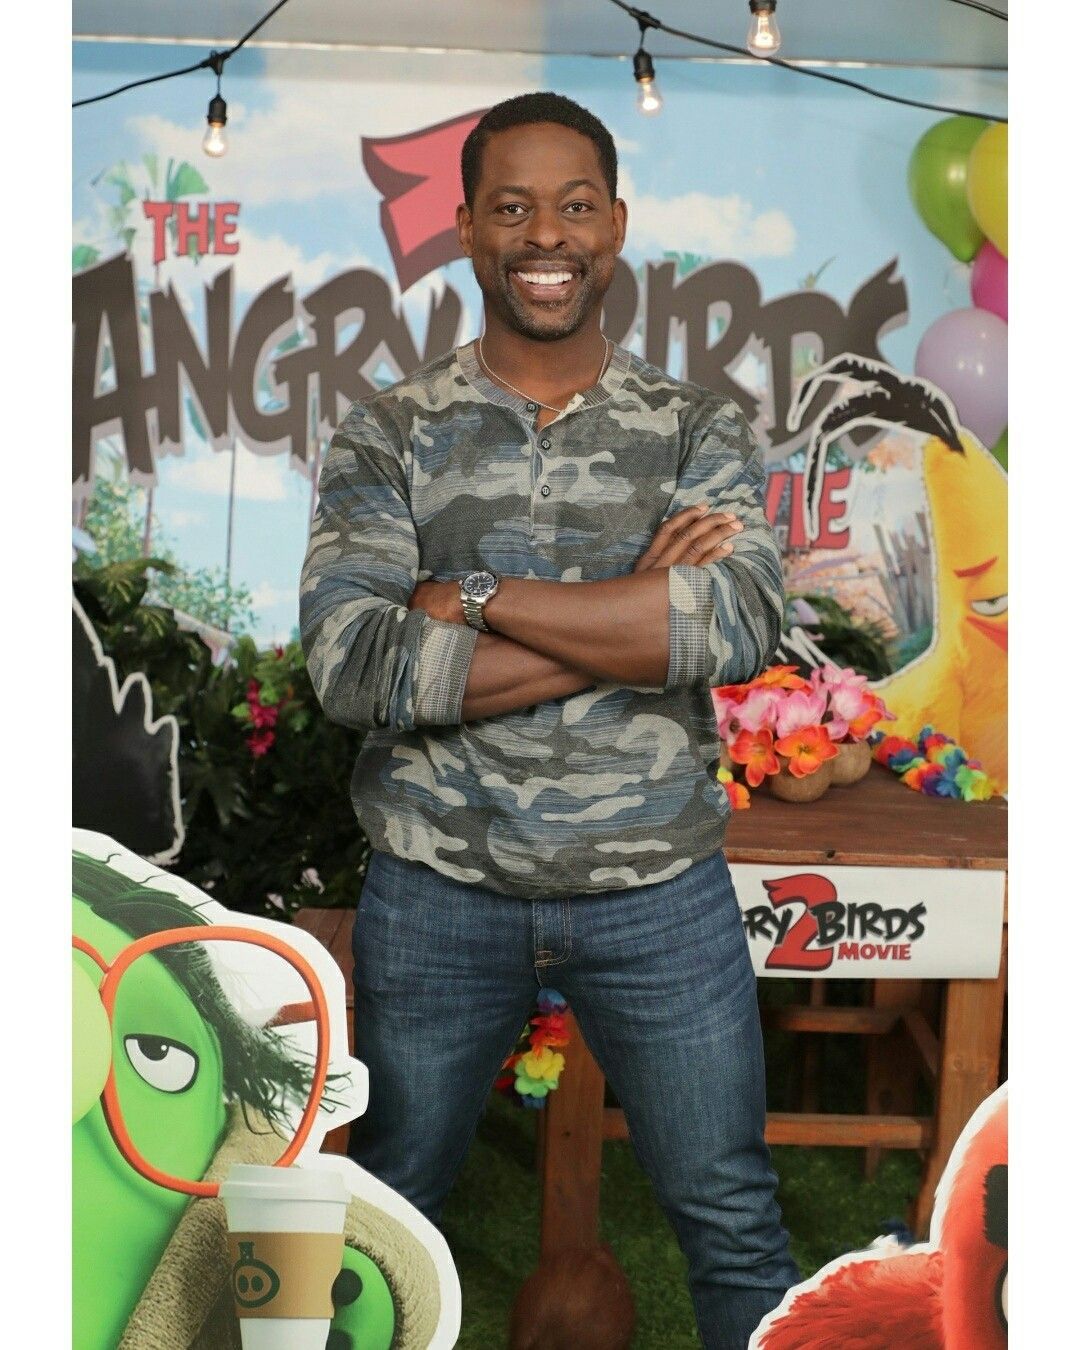 Angry Birds 2 Photocall event